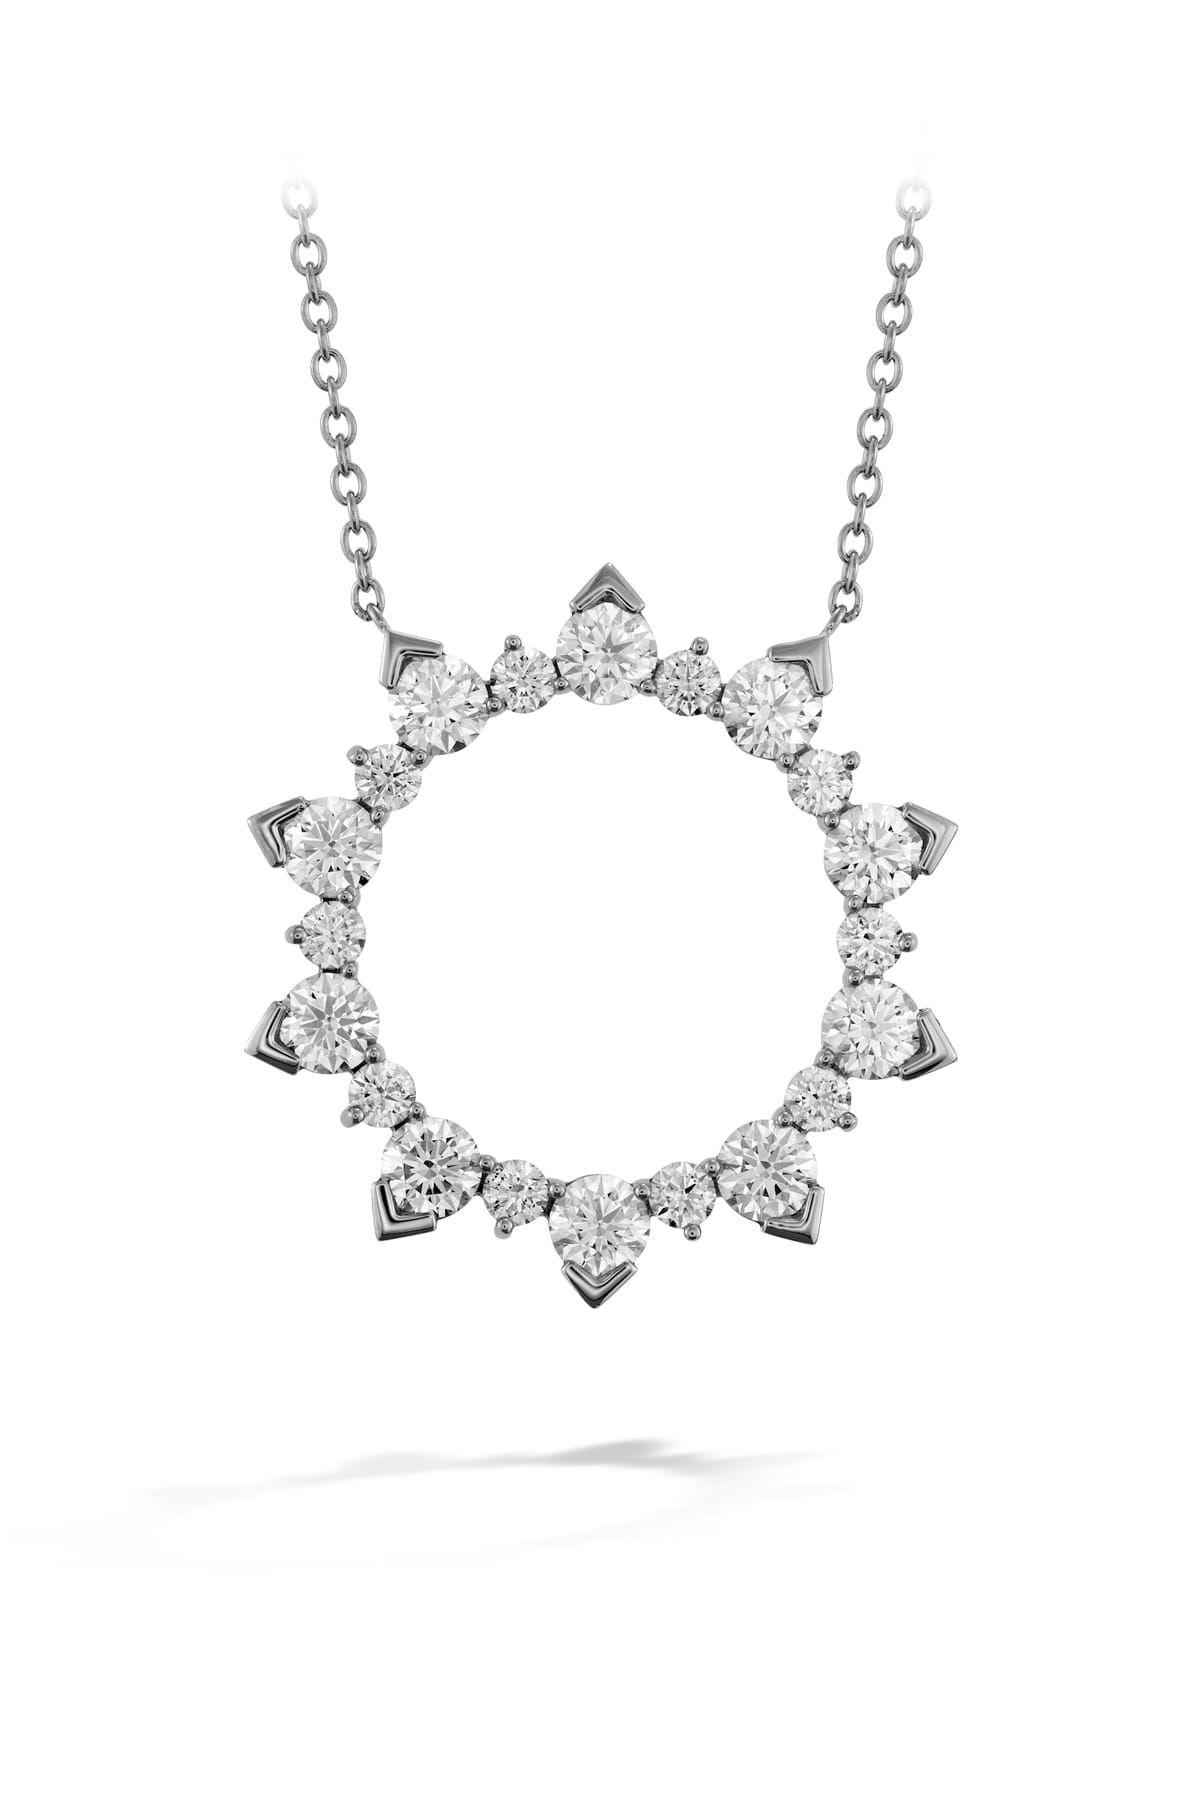 Aerial Eclipse Large Pendant From Hearts On Fire available at LeGassick Diamonds and Jewellery Gold Coast, Australia